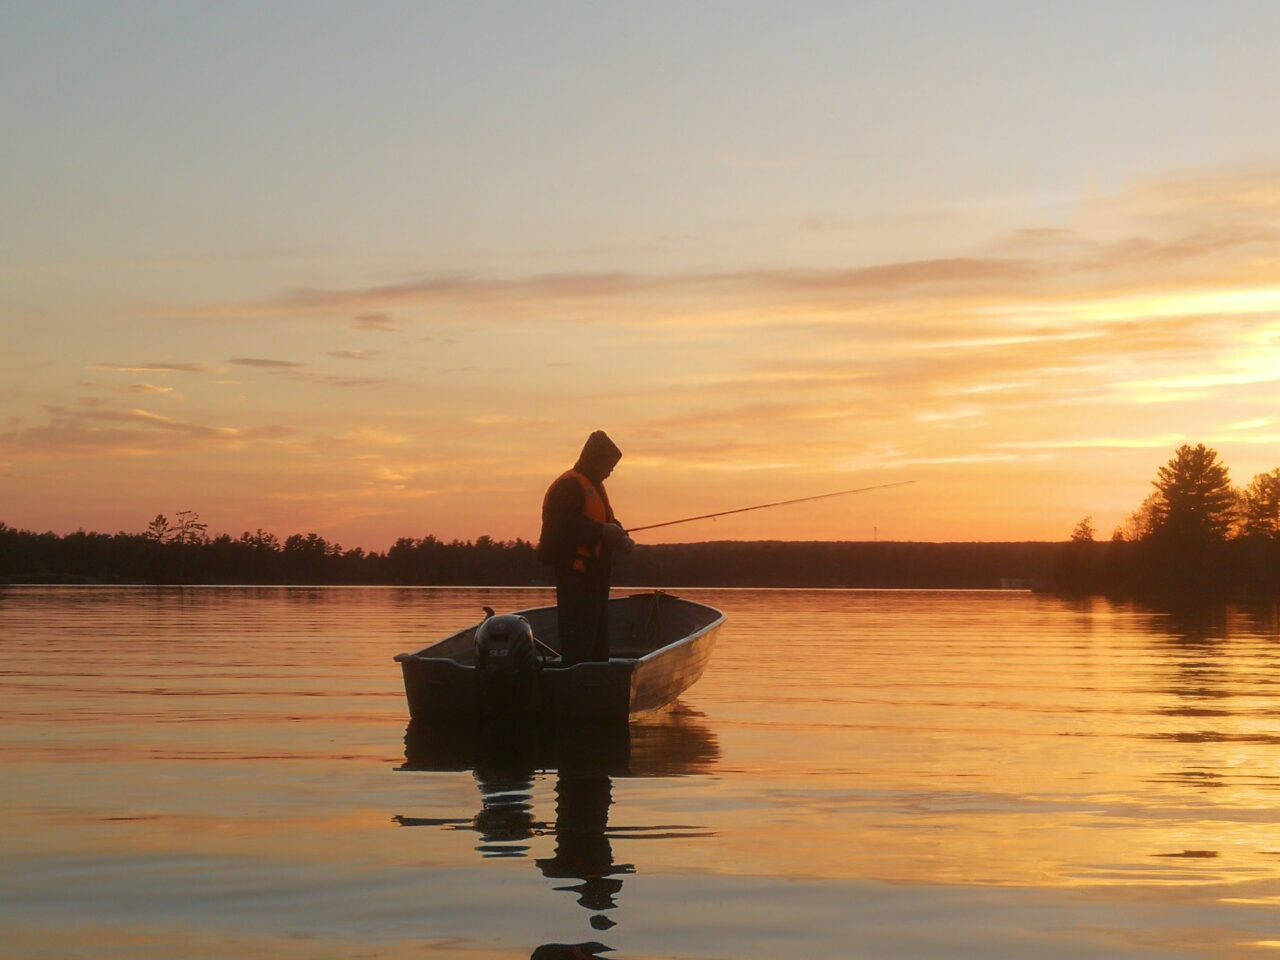 A man fishing from a small boat on a lake at sunset